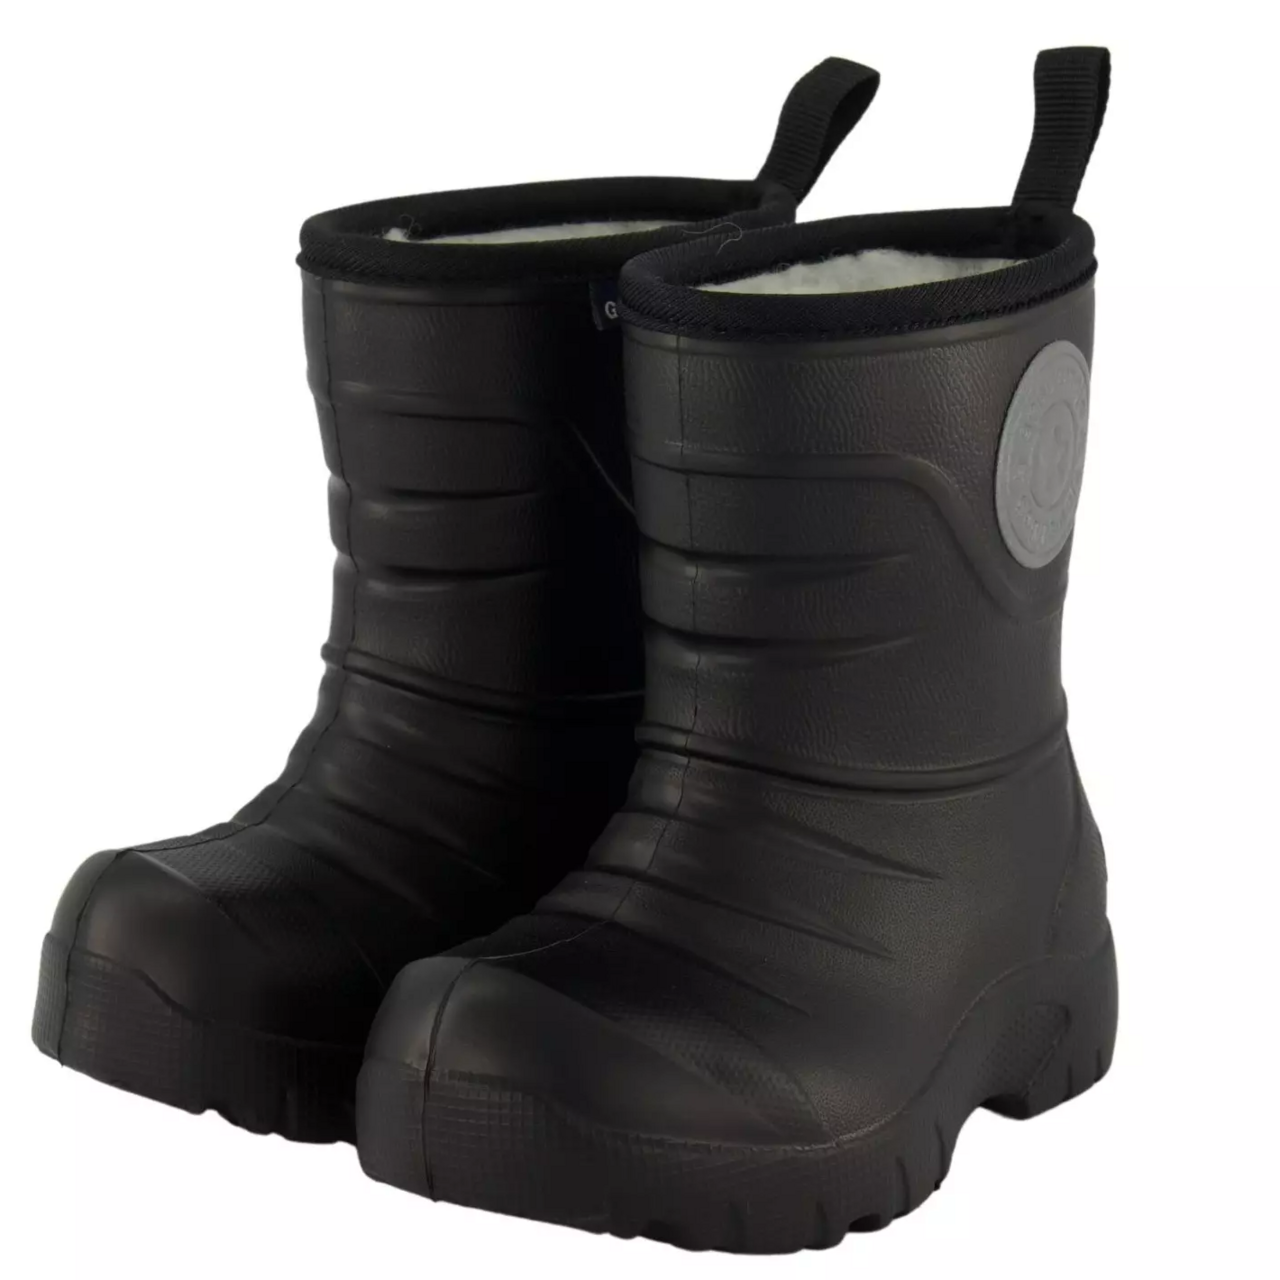 All-weather Boot Black 28